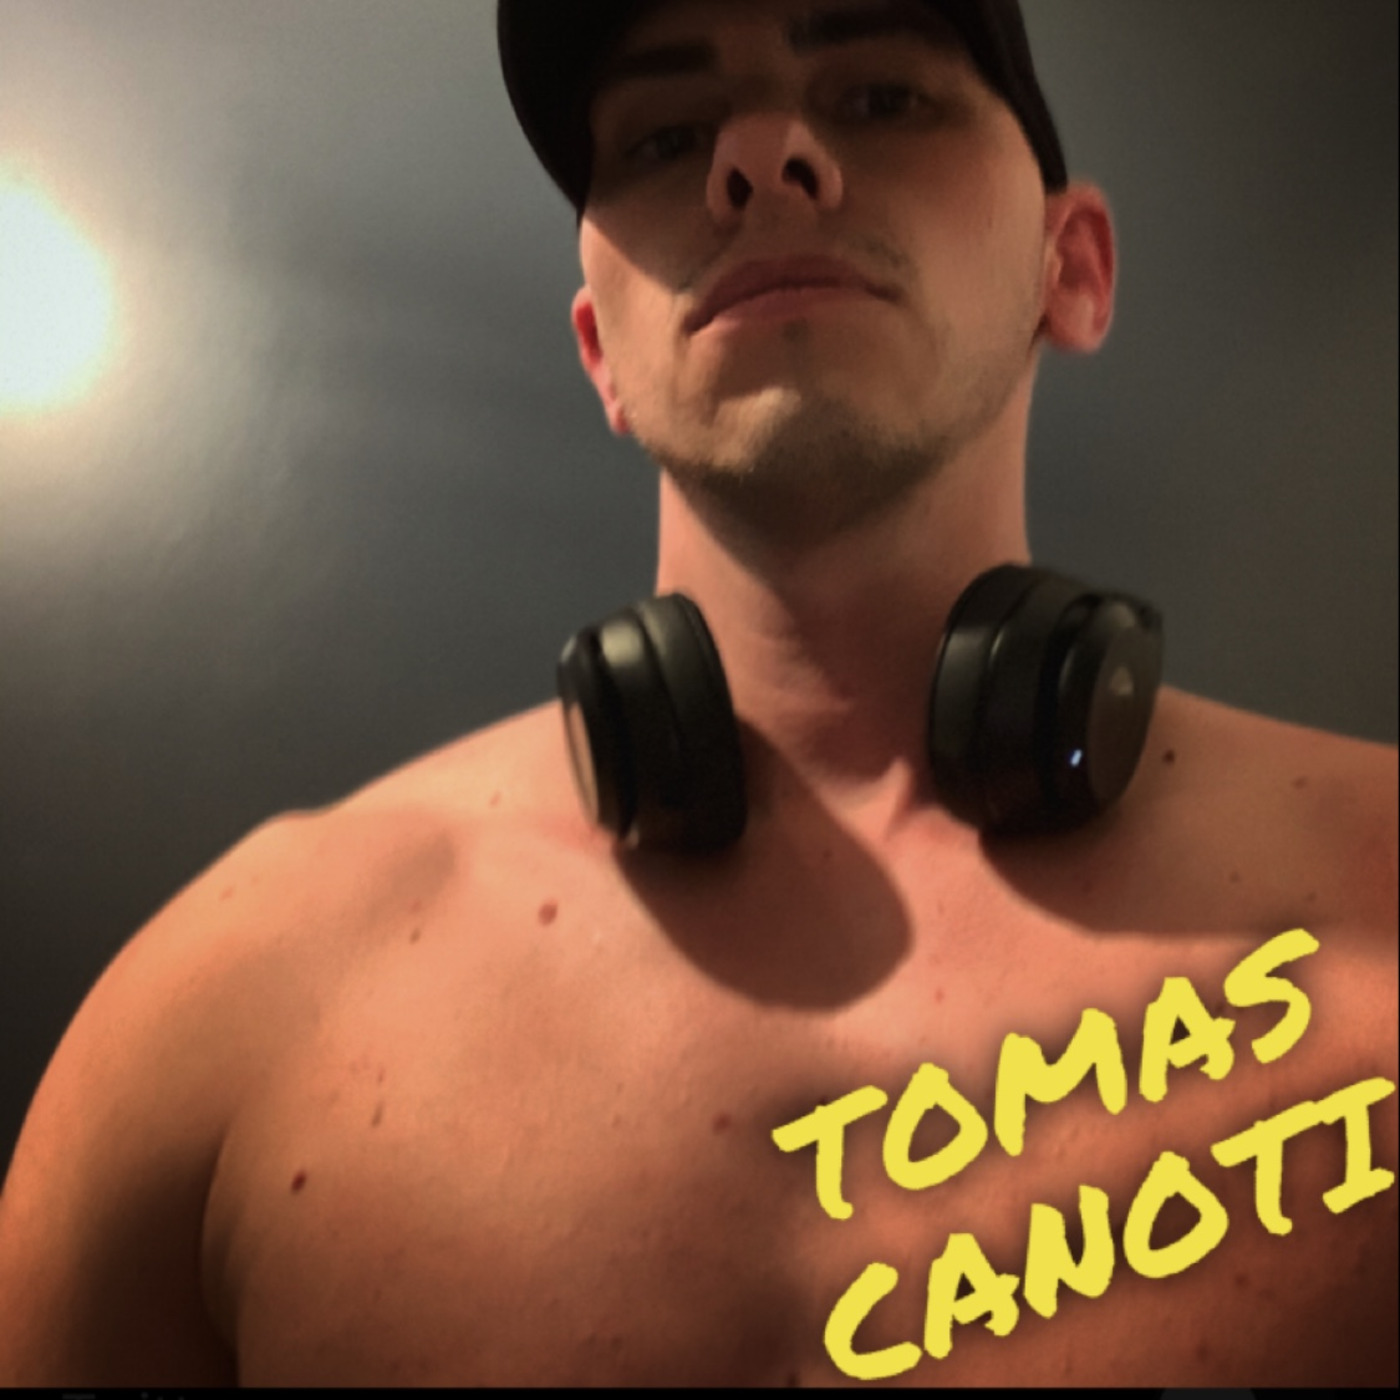 Tomas Canoti: The Sessions Podcast